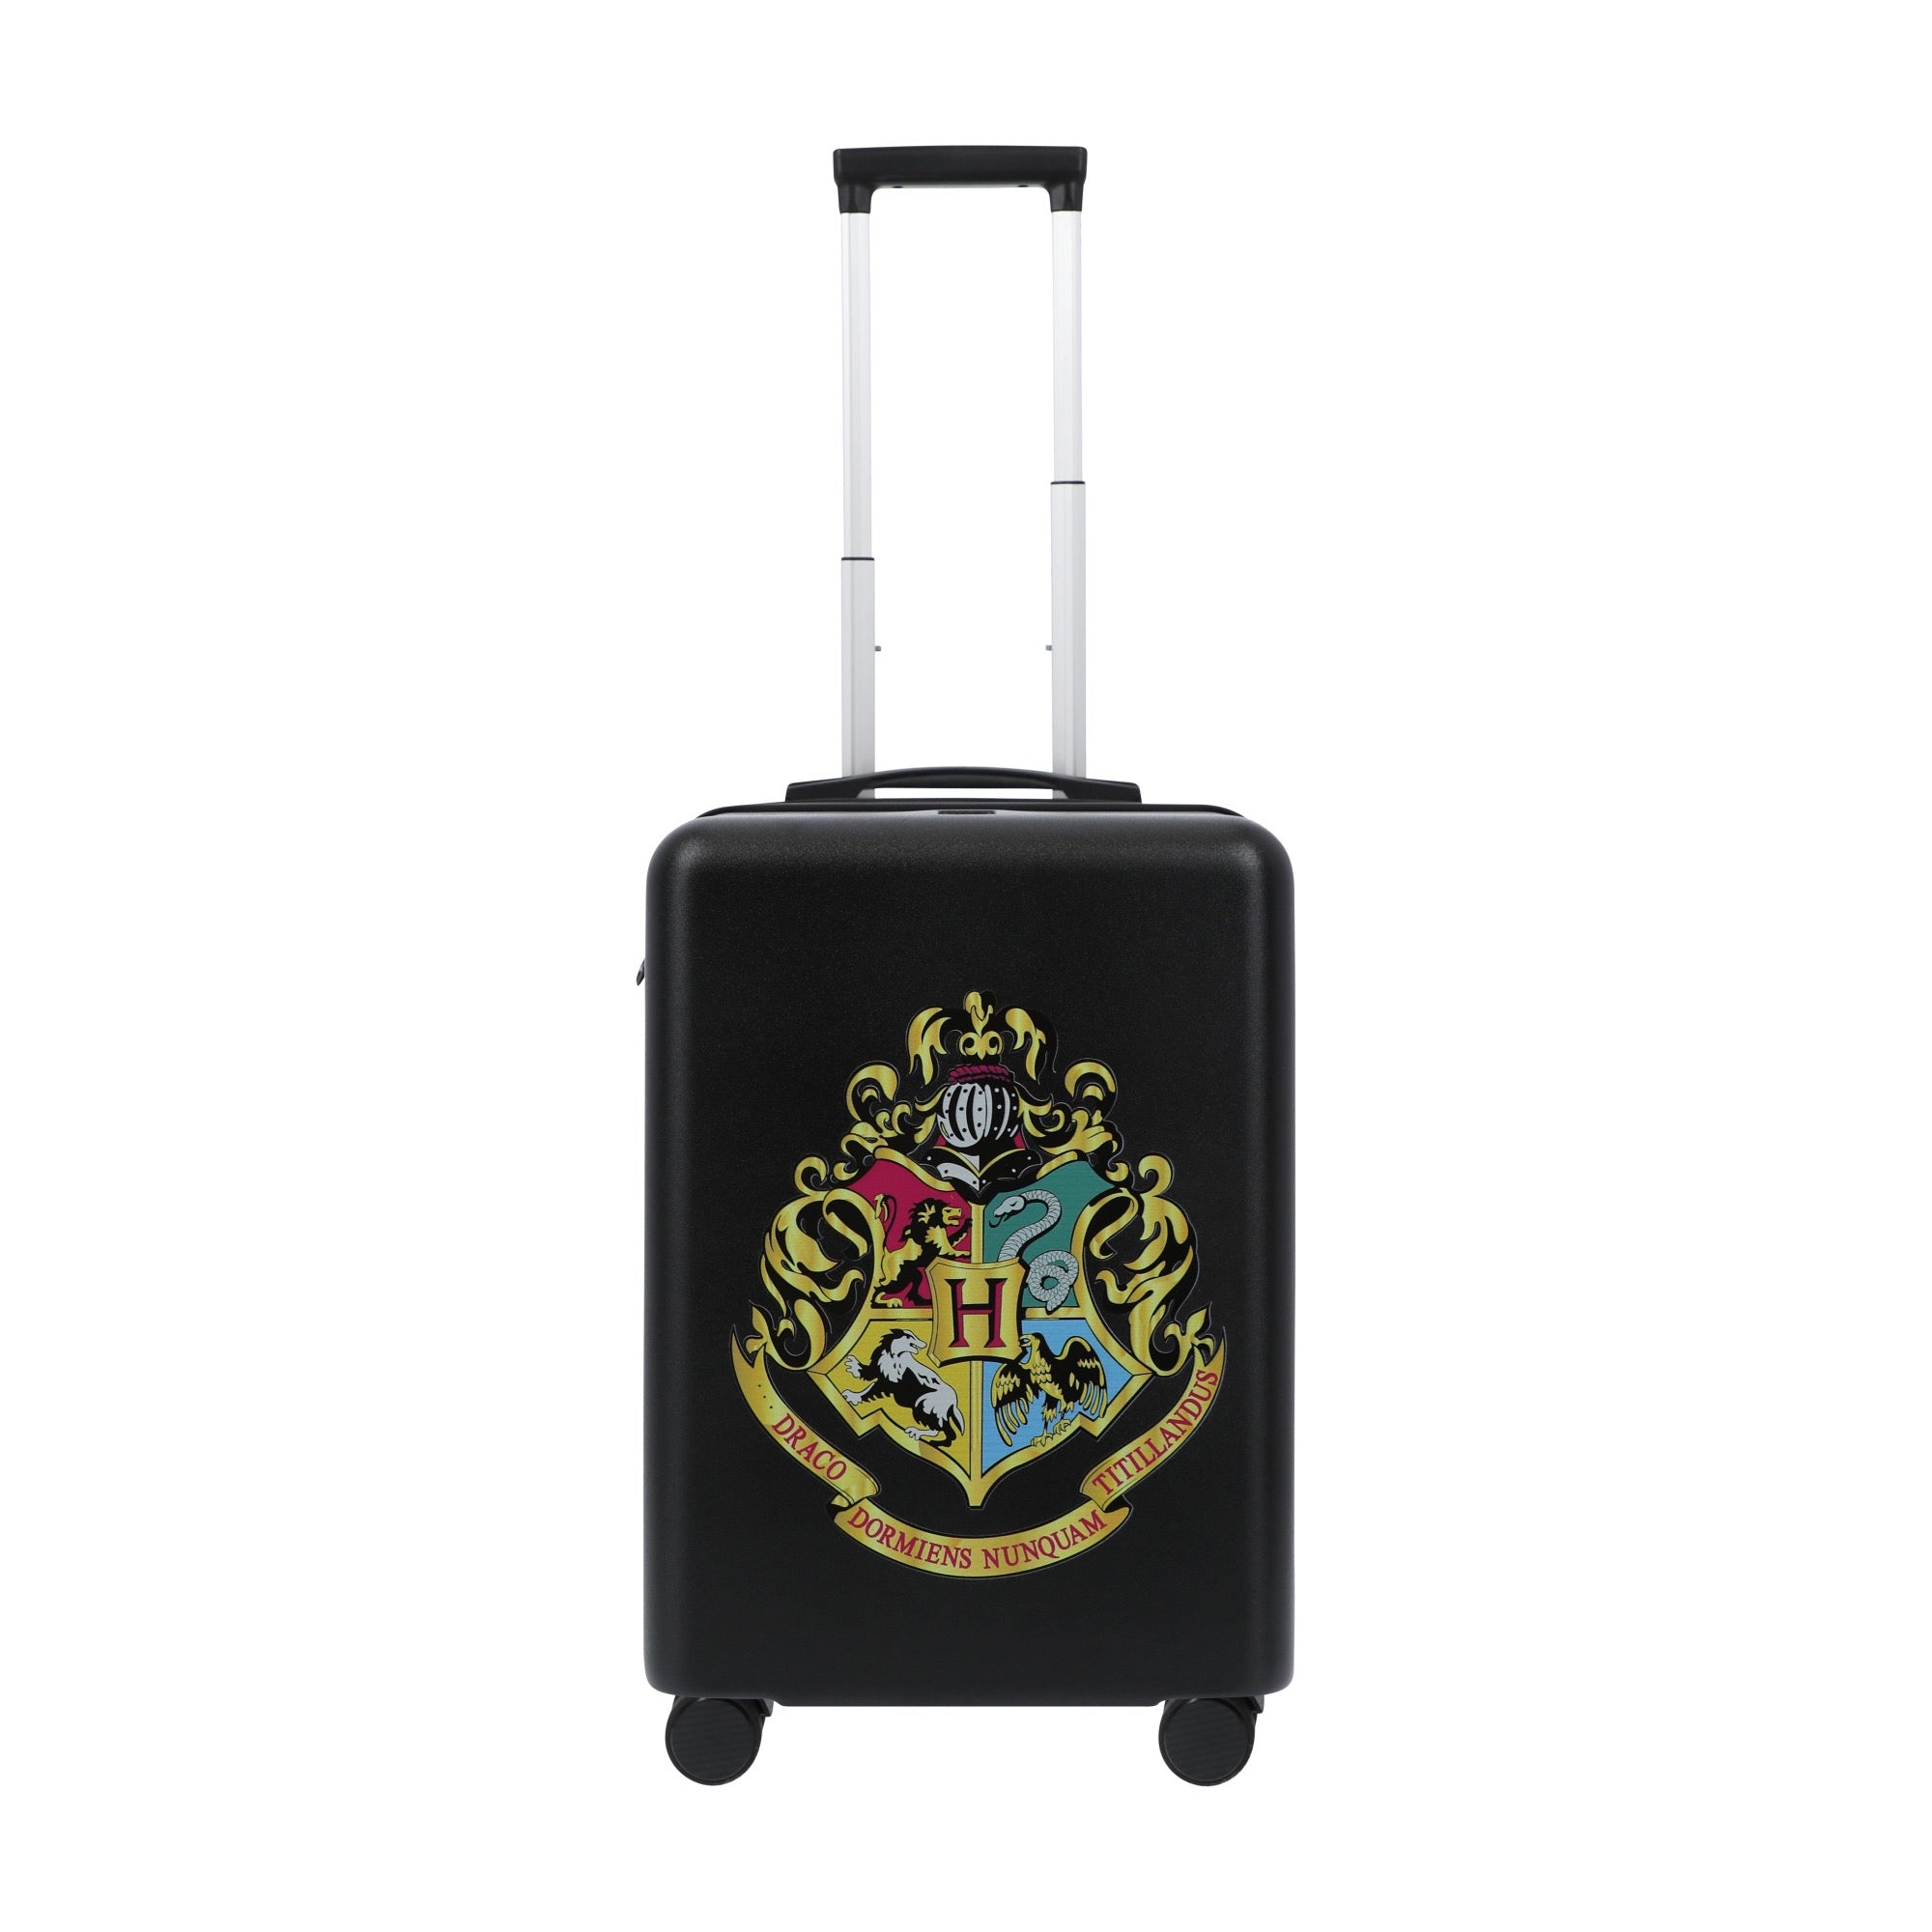 Black WB harry potter 22.5" carry-on spinner suitcase luggage by Ful